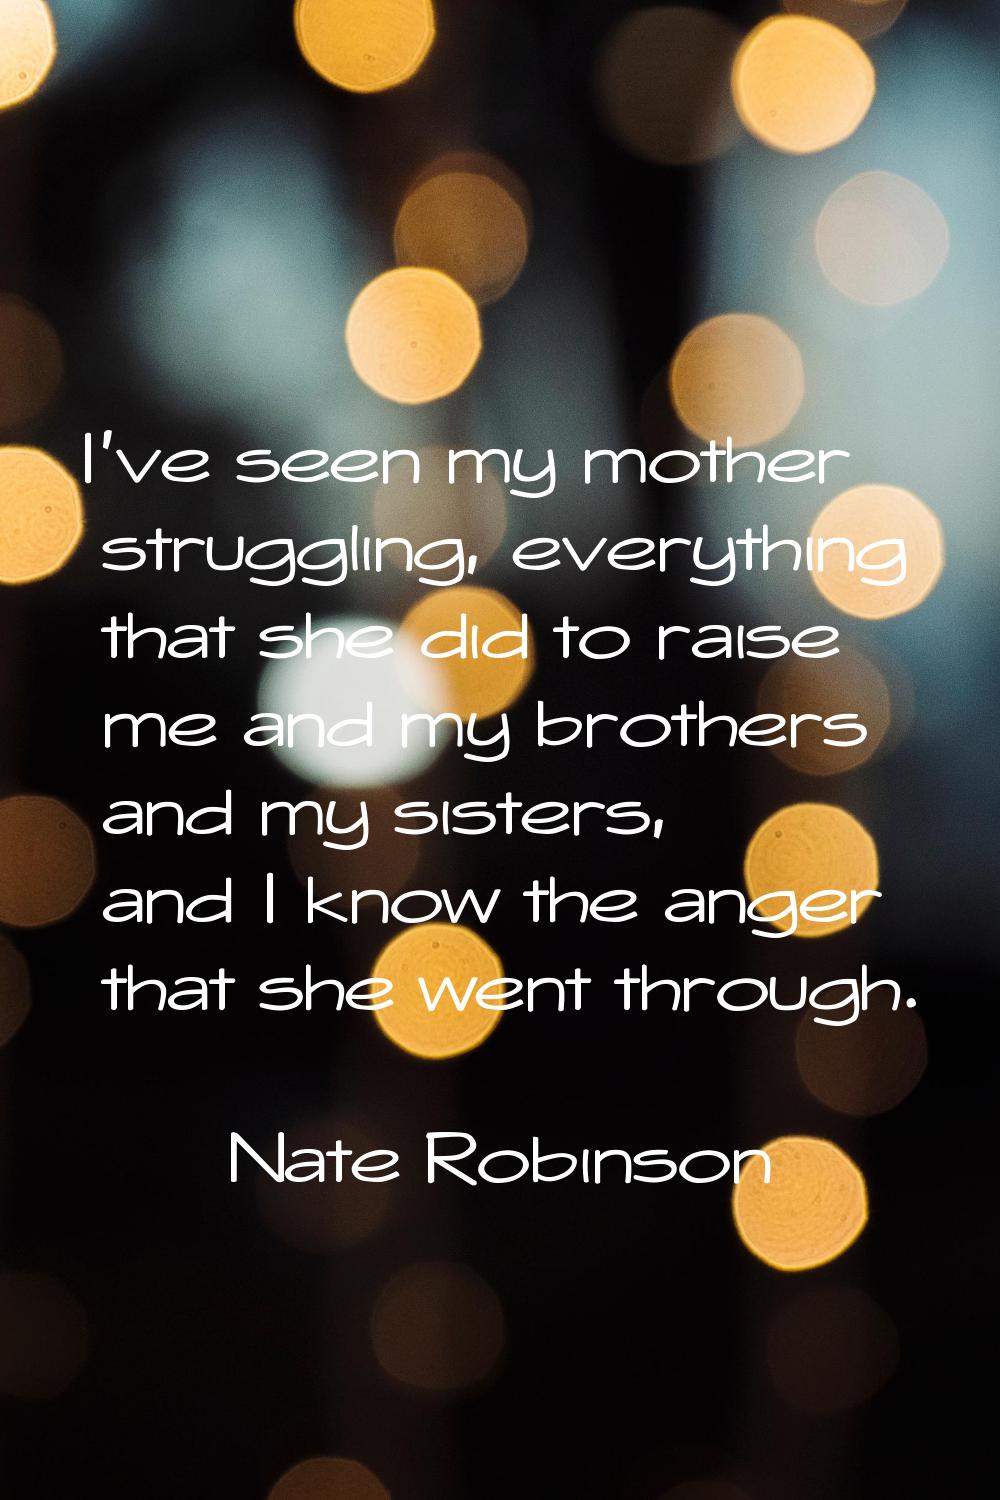 I've seen my mother struggling, everything that she did to raise me and my brothers and my sisters,